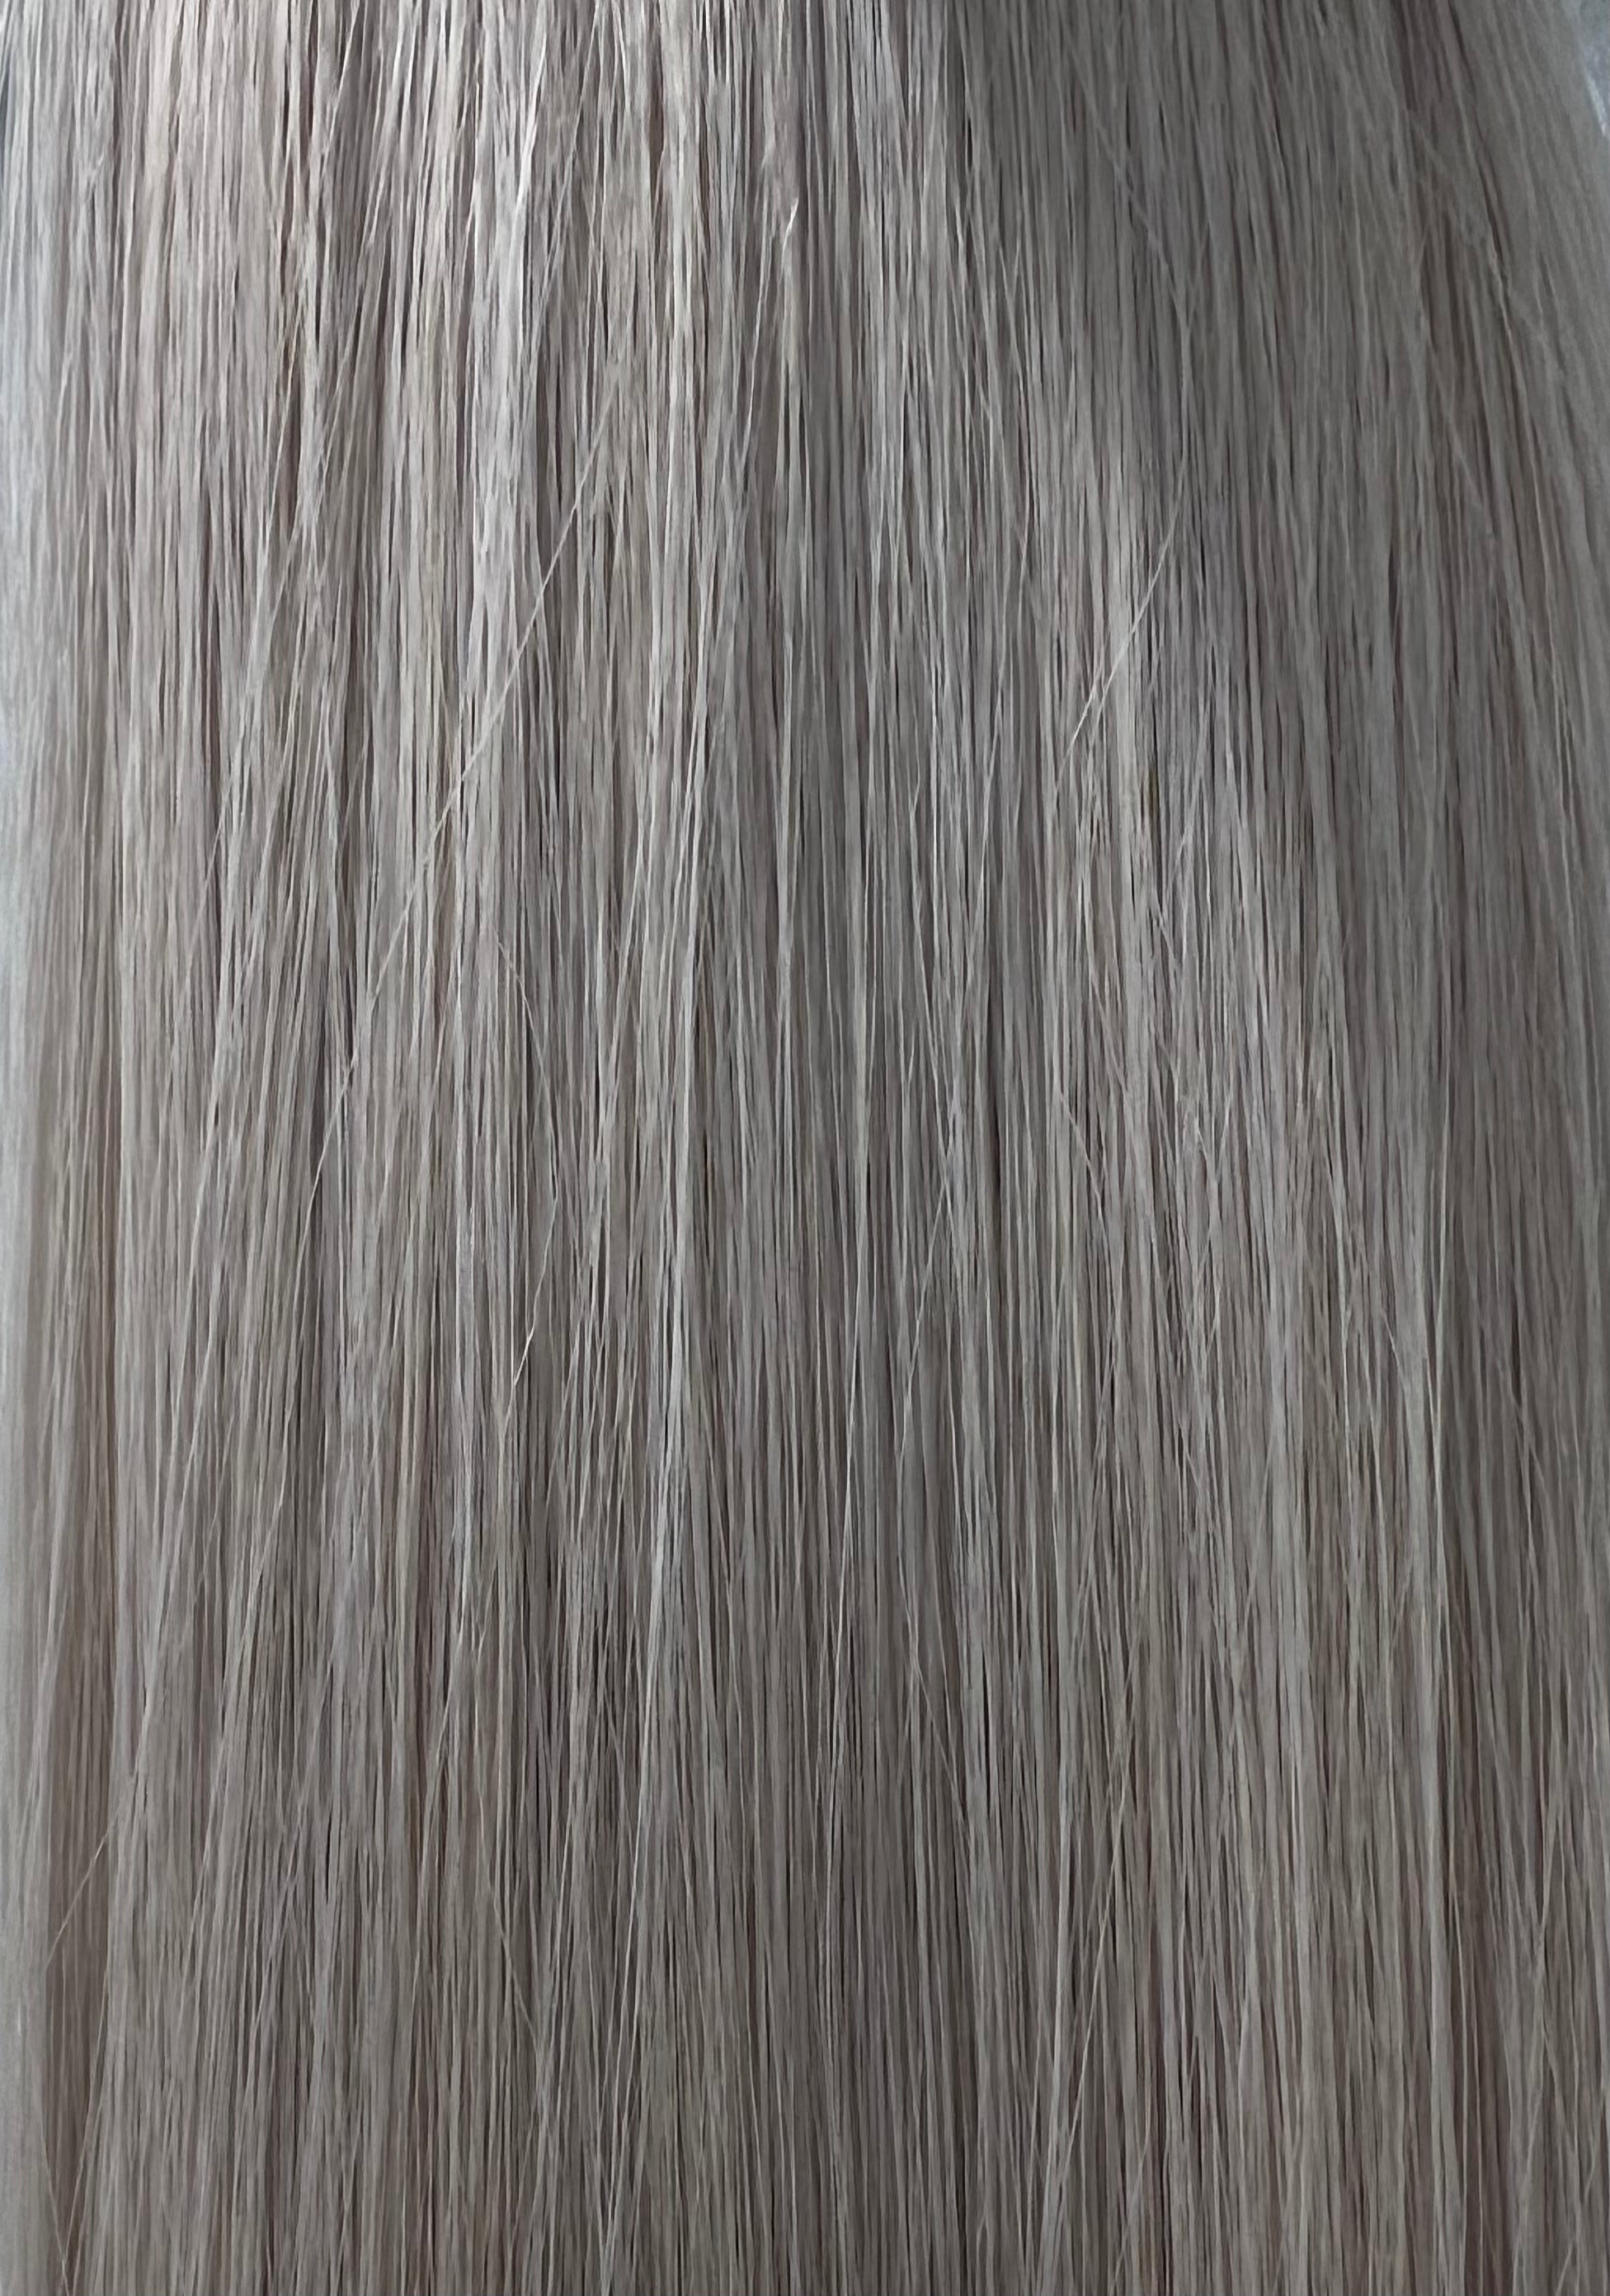 C#GREY- EXTENSIONS EUROGOLD TRAME/WEFT